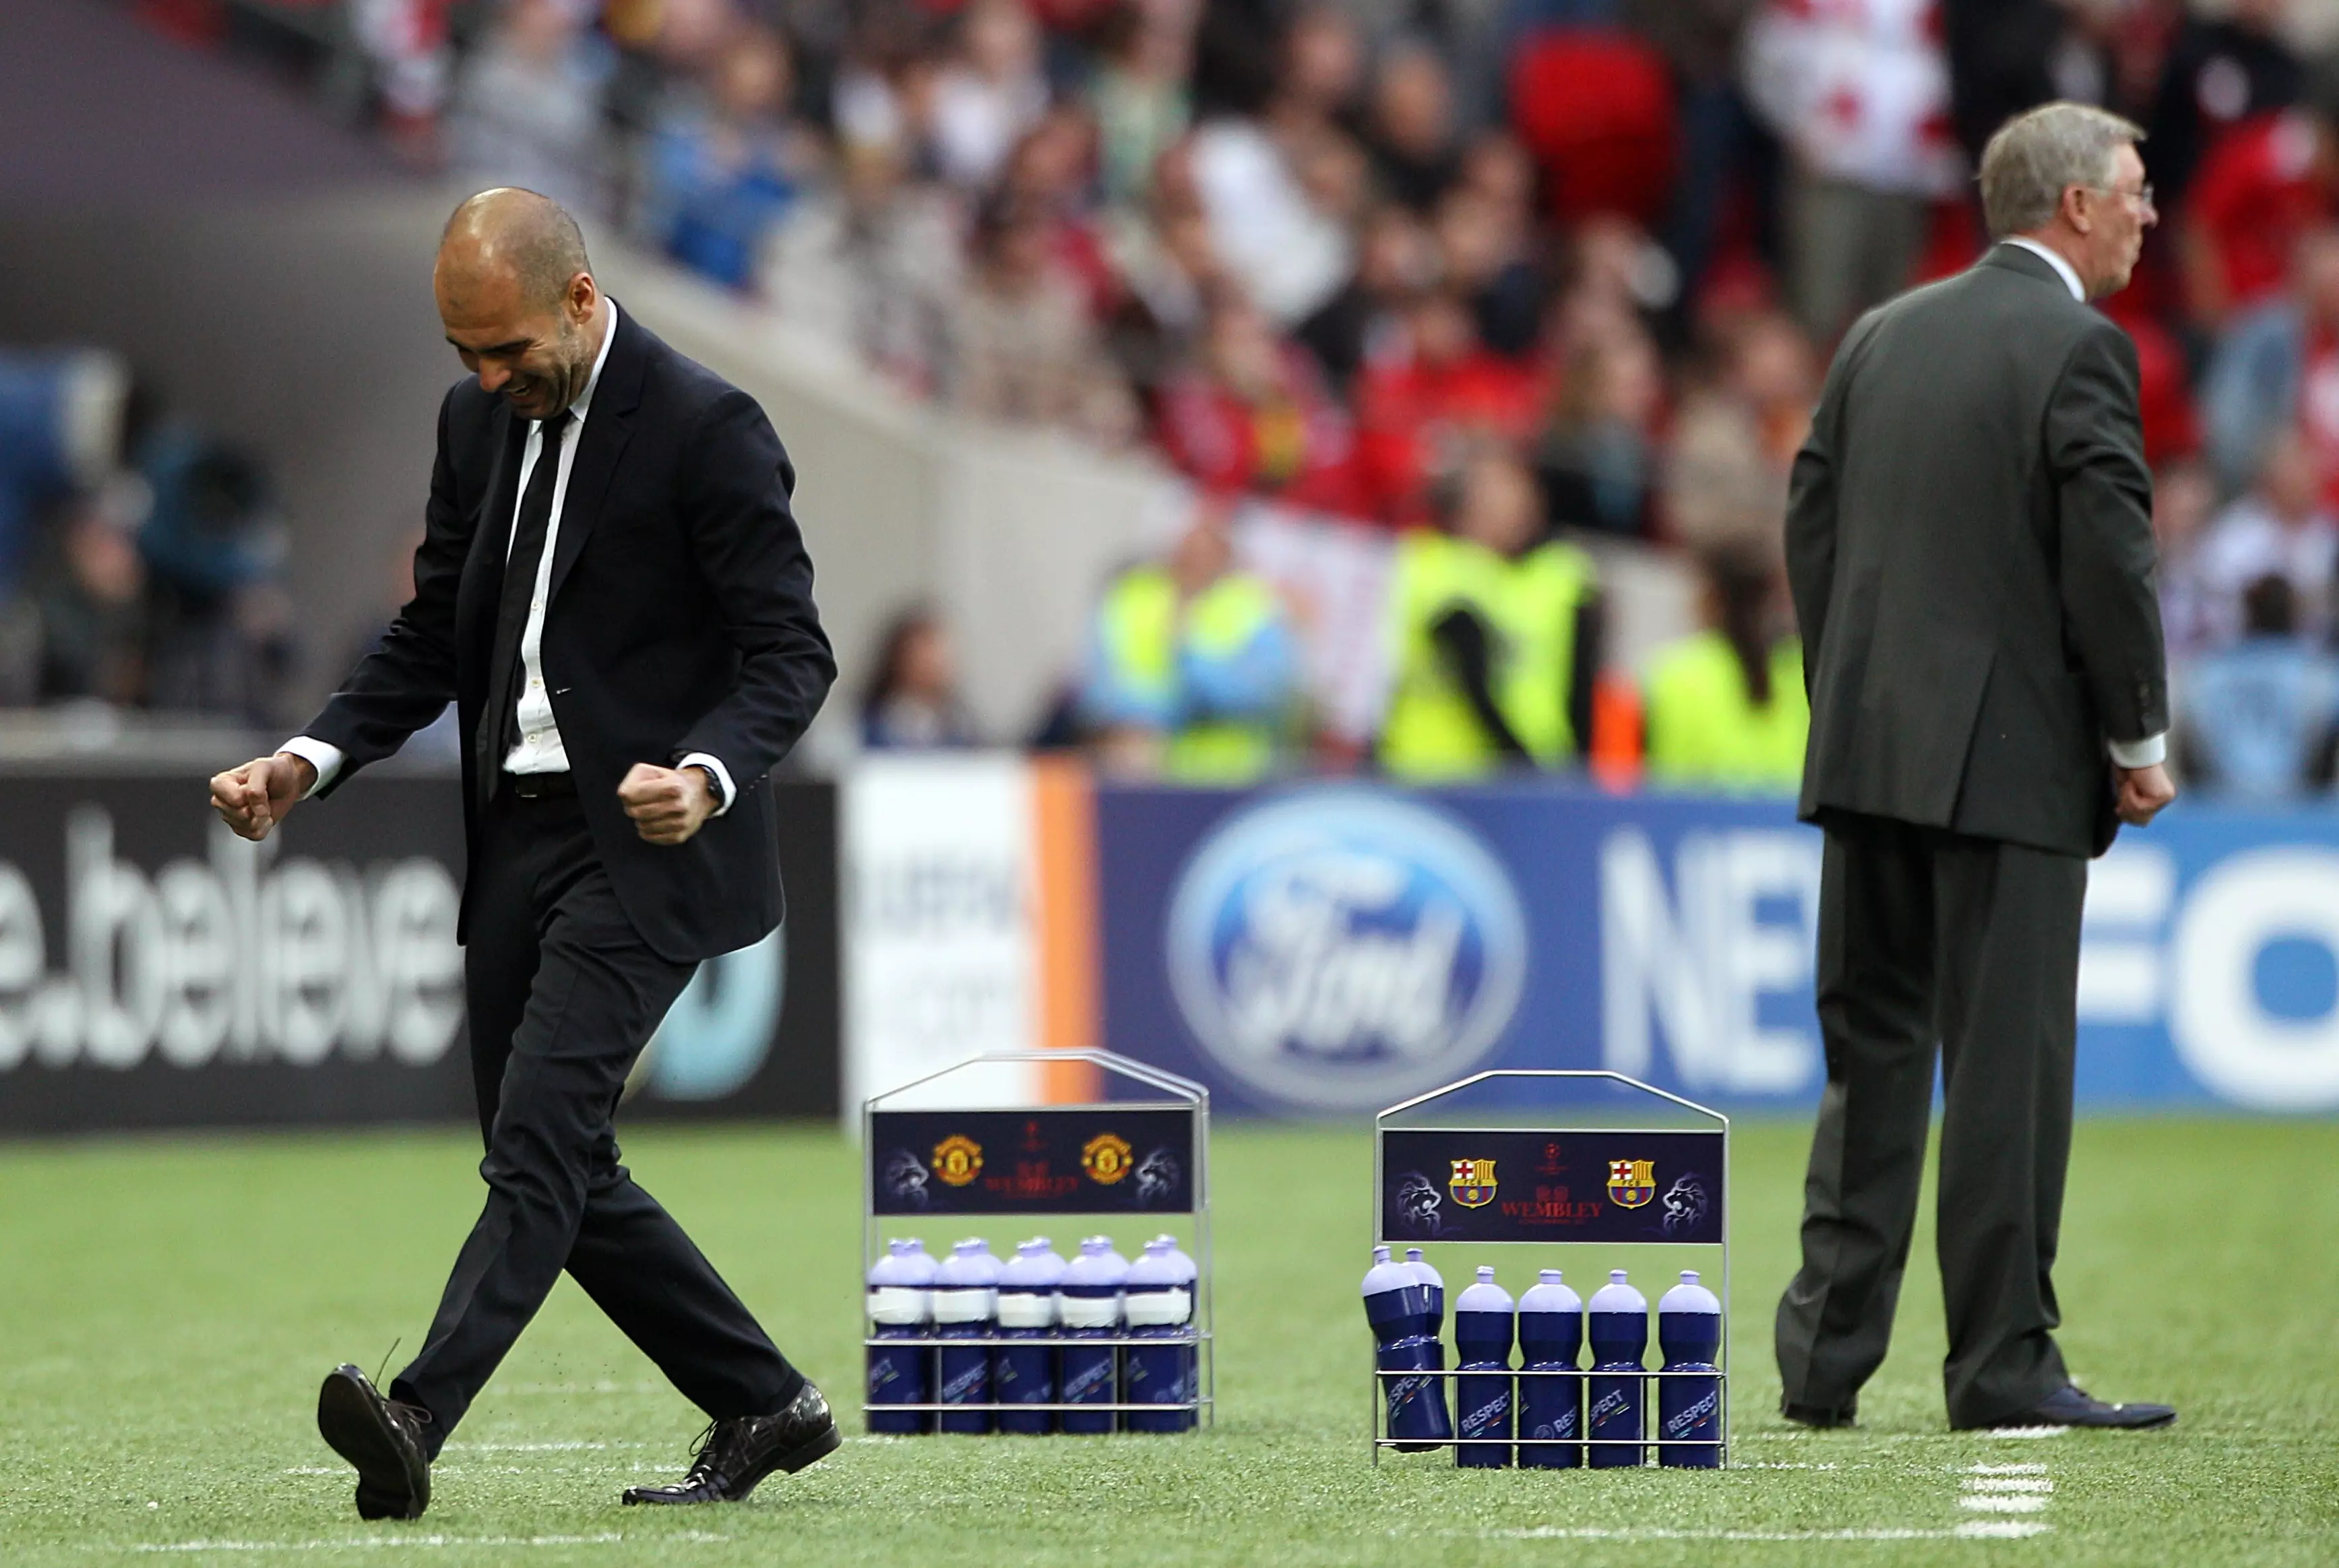 Pep gets one over Fergie in the Champions League. Image: PA Images